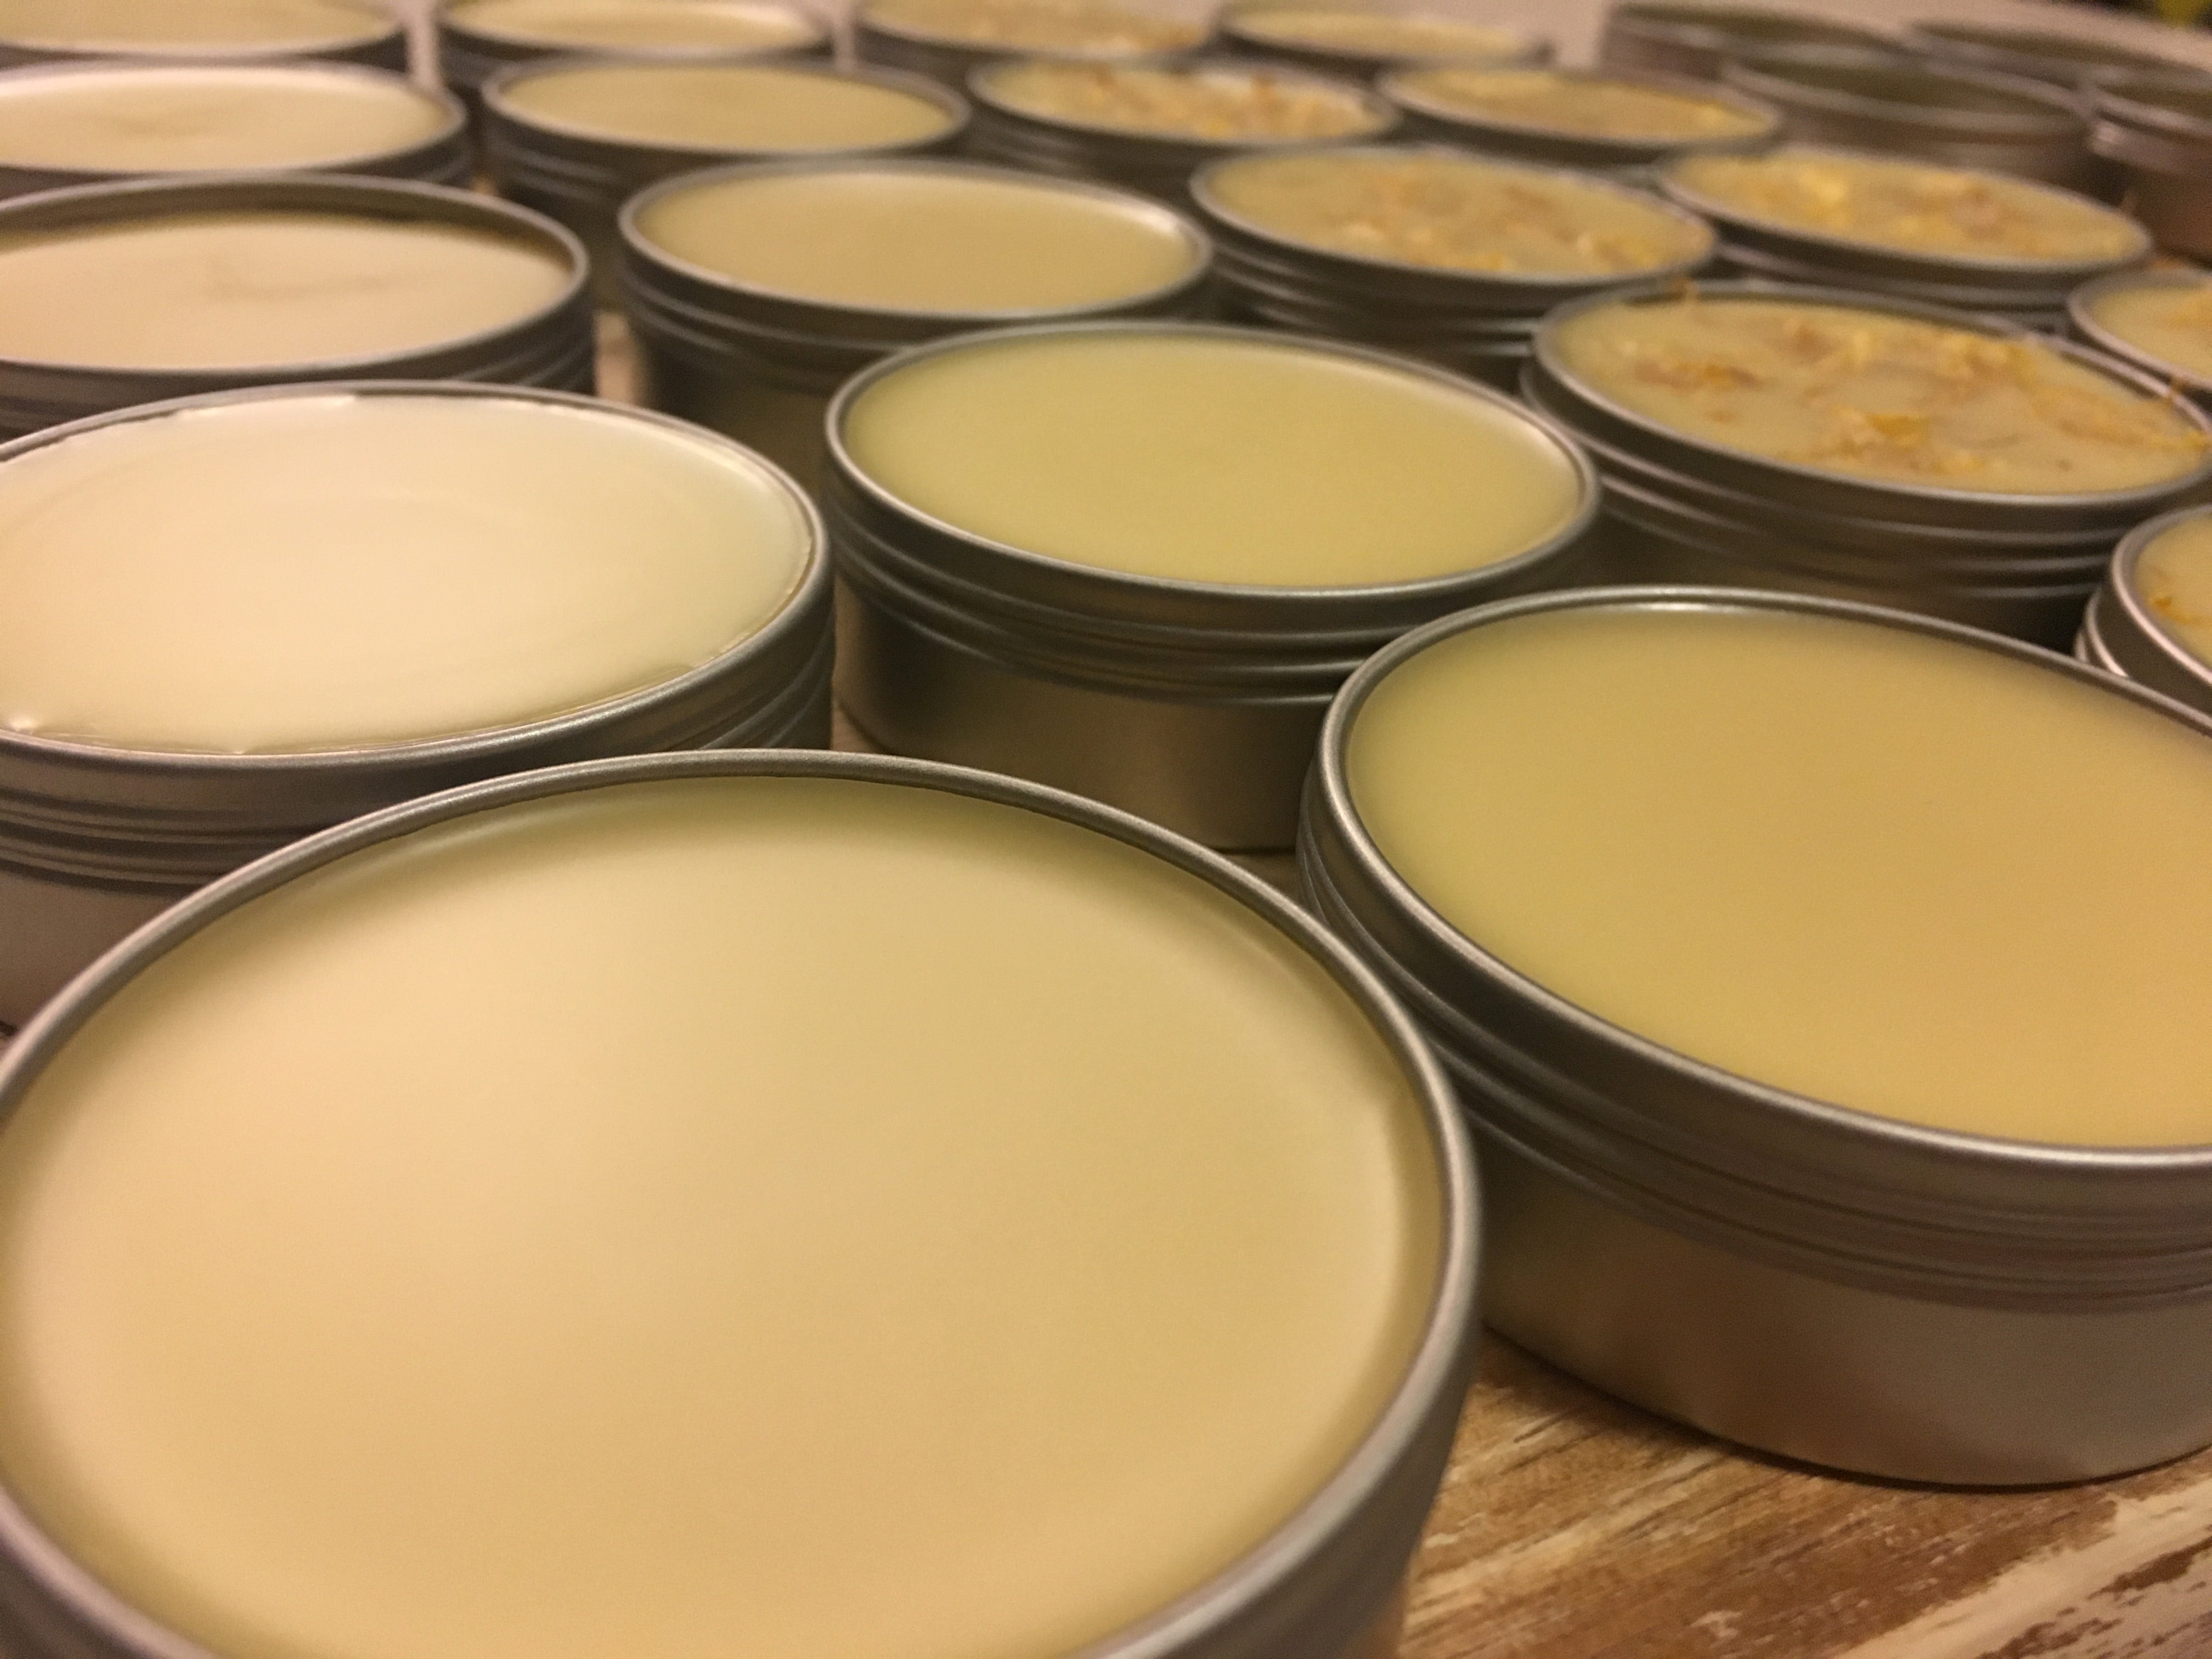 Our organic paw wax is handcrafted in small batches for ultimate quality and consistency. Use it to protect pads from drying out in the cold and snow or to heal dry and cracked pads and noses.